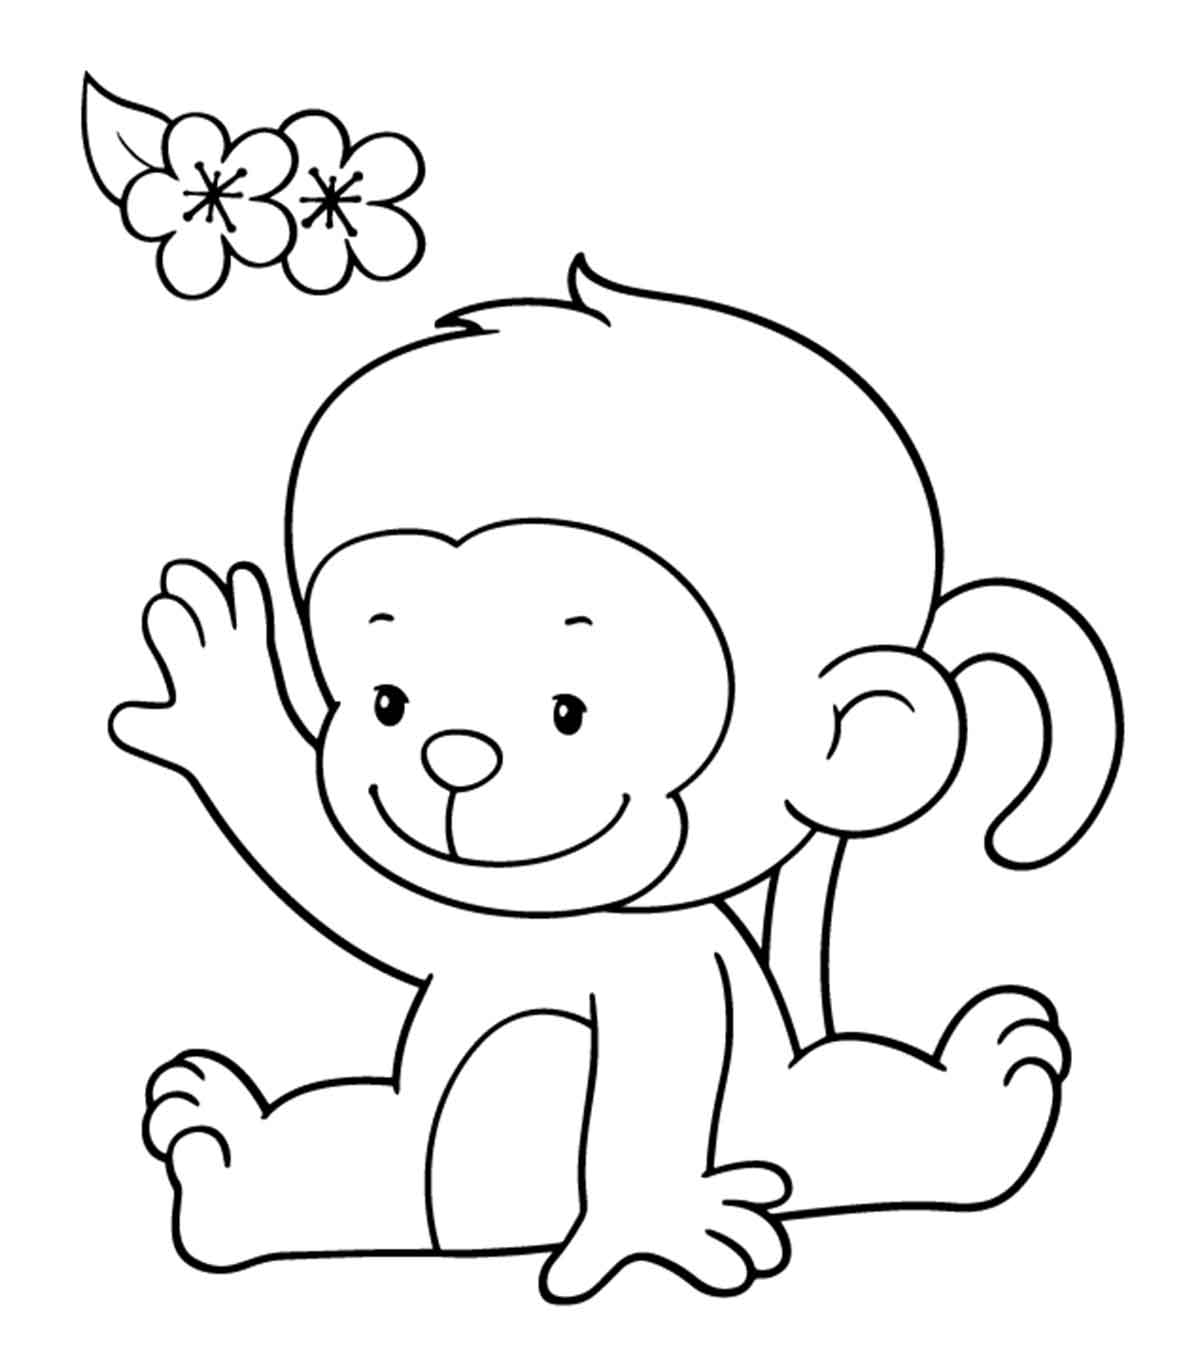 Coloring Pages Of Monkeys Top 25 Free Printable Monkey Coloring Pages For Kids